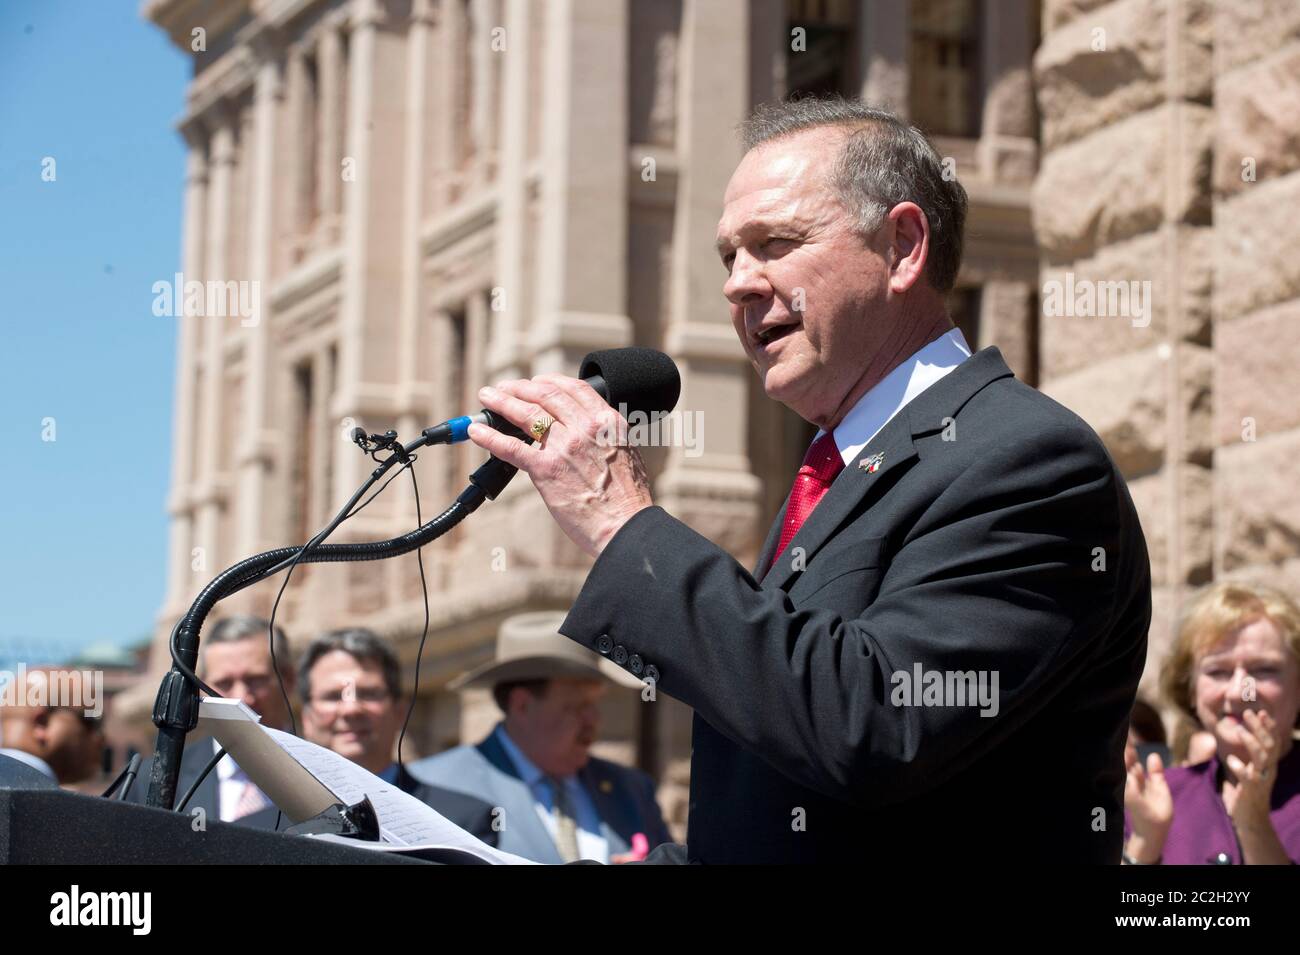 Austin Texas USA, March 24 2015: Controversial Alabama Supreme Court Chief Justice Roy Moore speaking alongside conservative Texas legislators opposing gay marriage at a Texas Capitol rally. Moore has told Alabama judges to ignore a recent federal court ruling allowing gay marriage in the state.   ©Bob Daemmrich Stock Photo